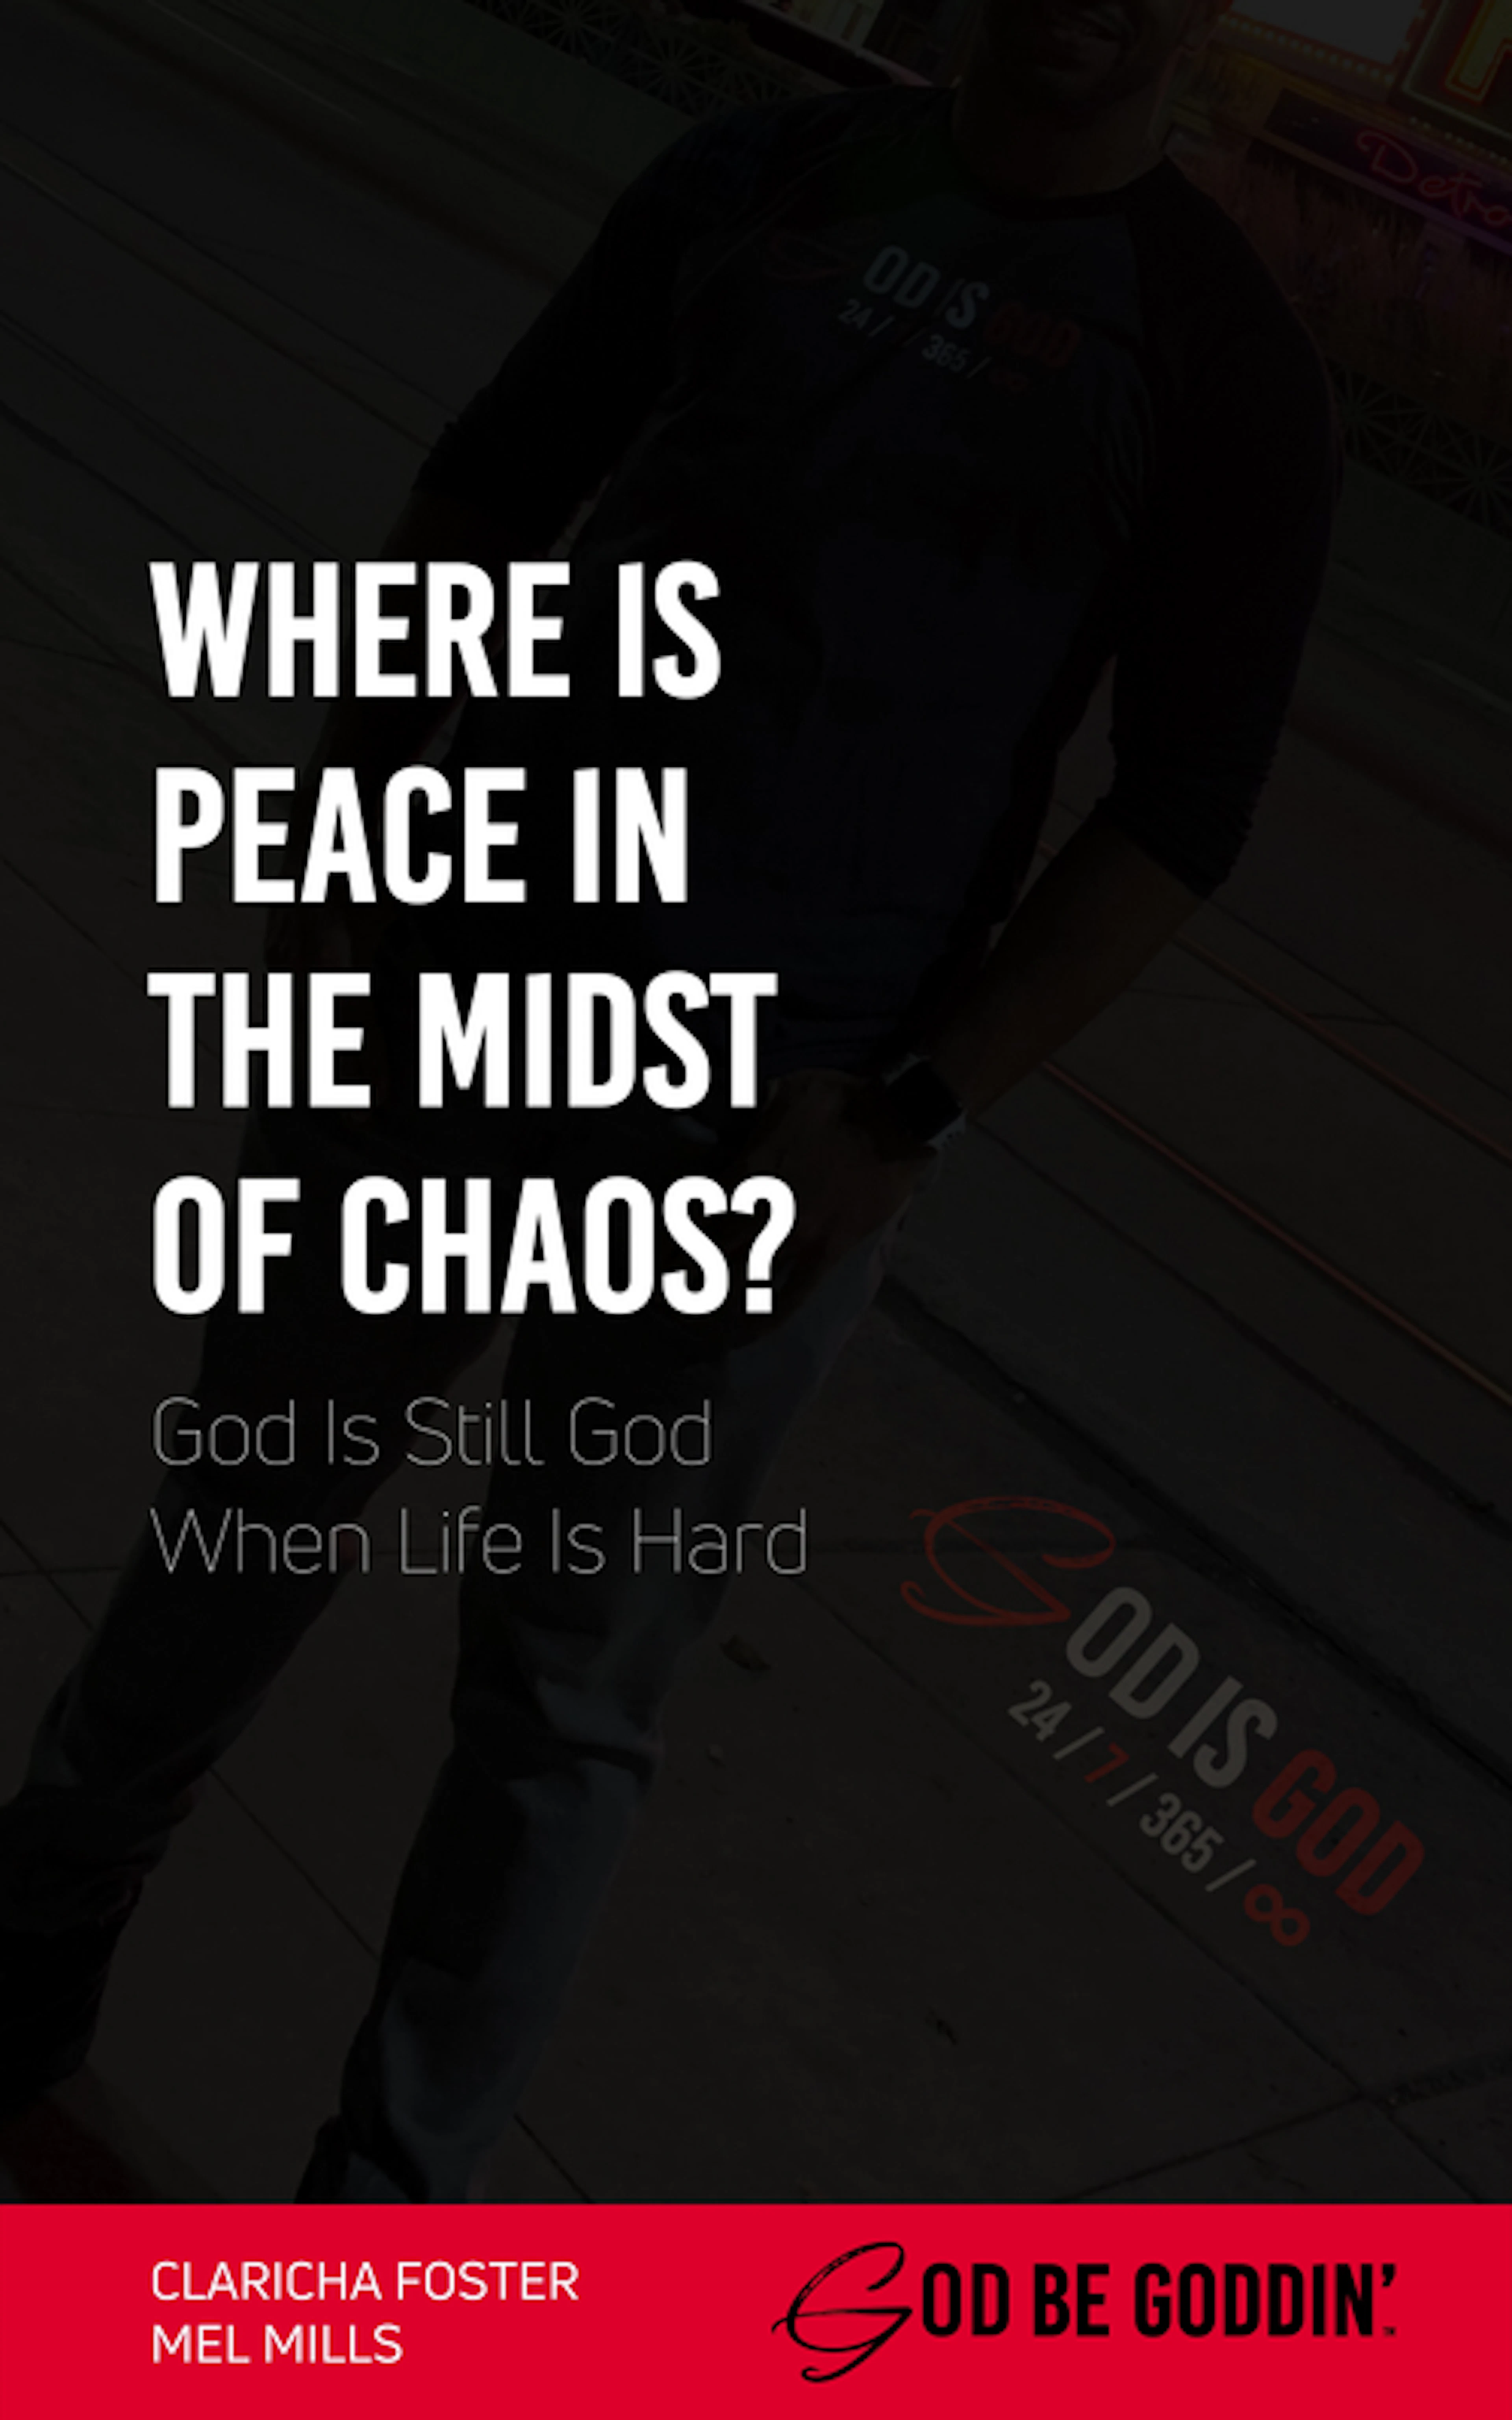 Where Is Peace In The Midst of Chaos?